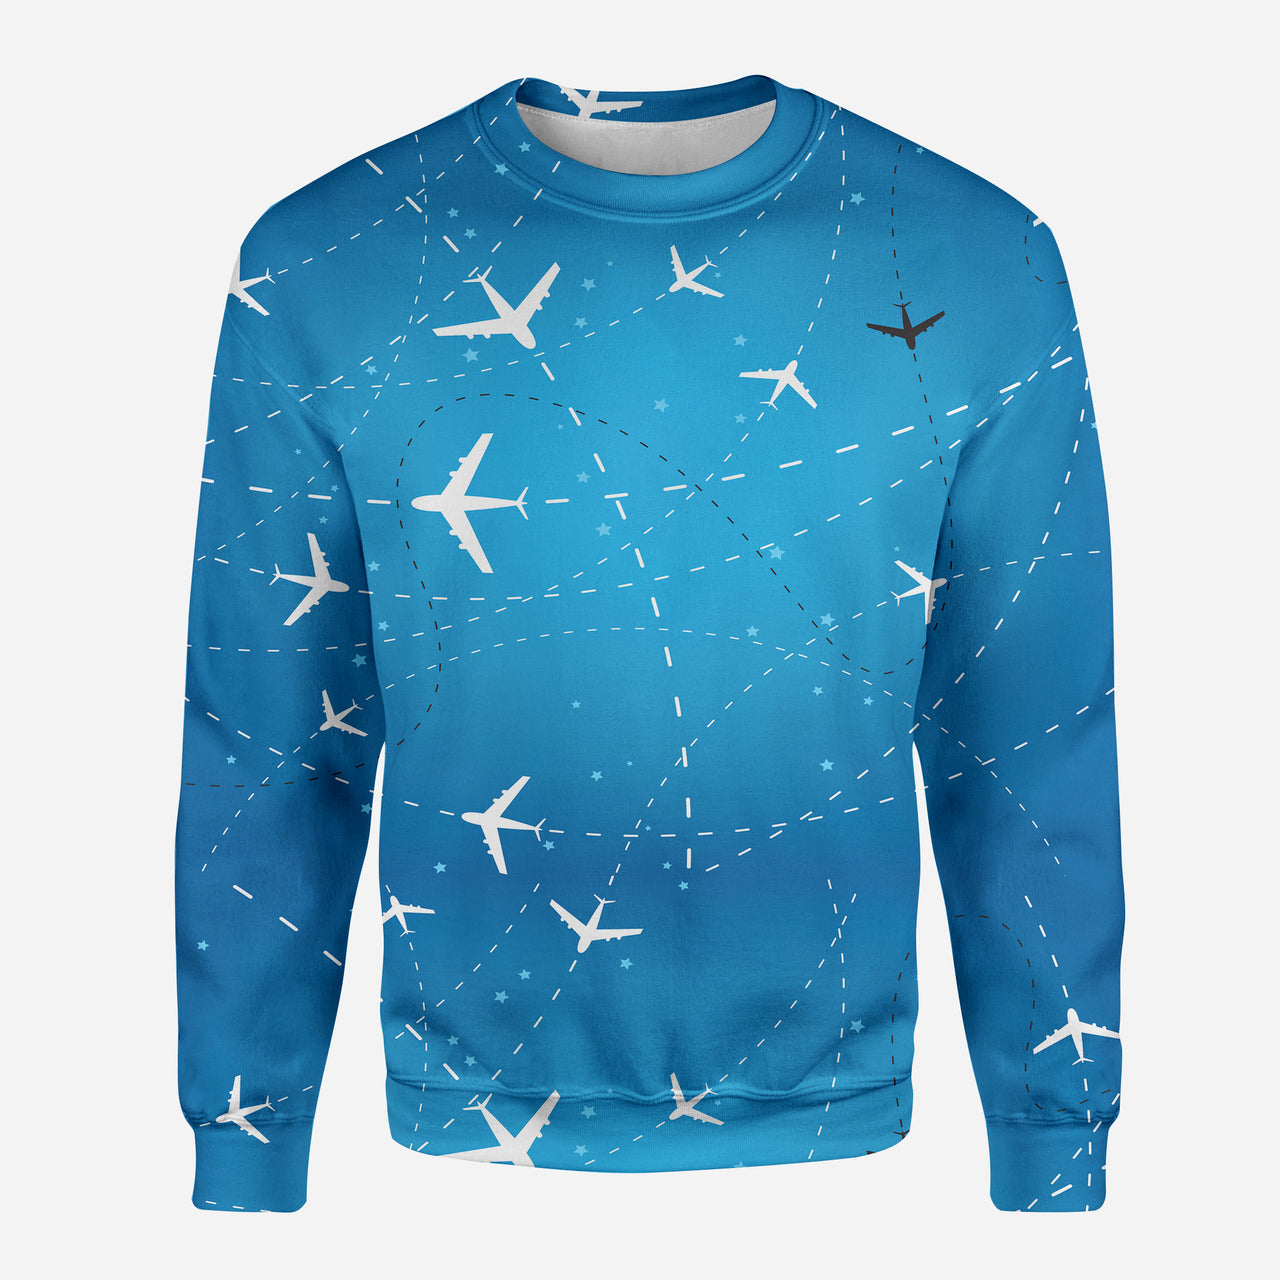 Travelling with Aircraft Designed 3D Sweatshirts